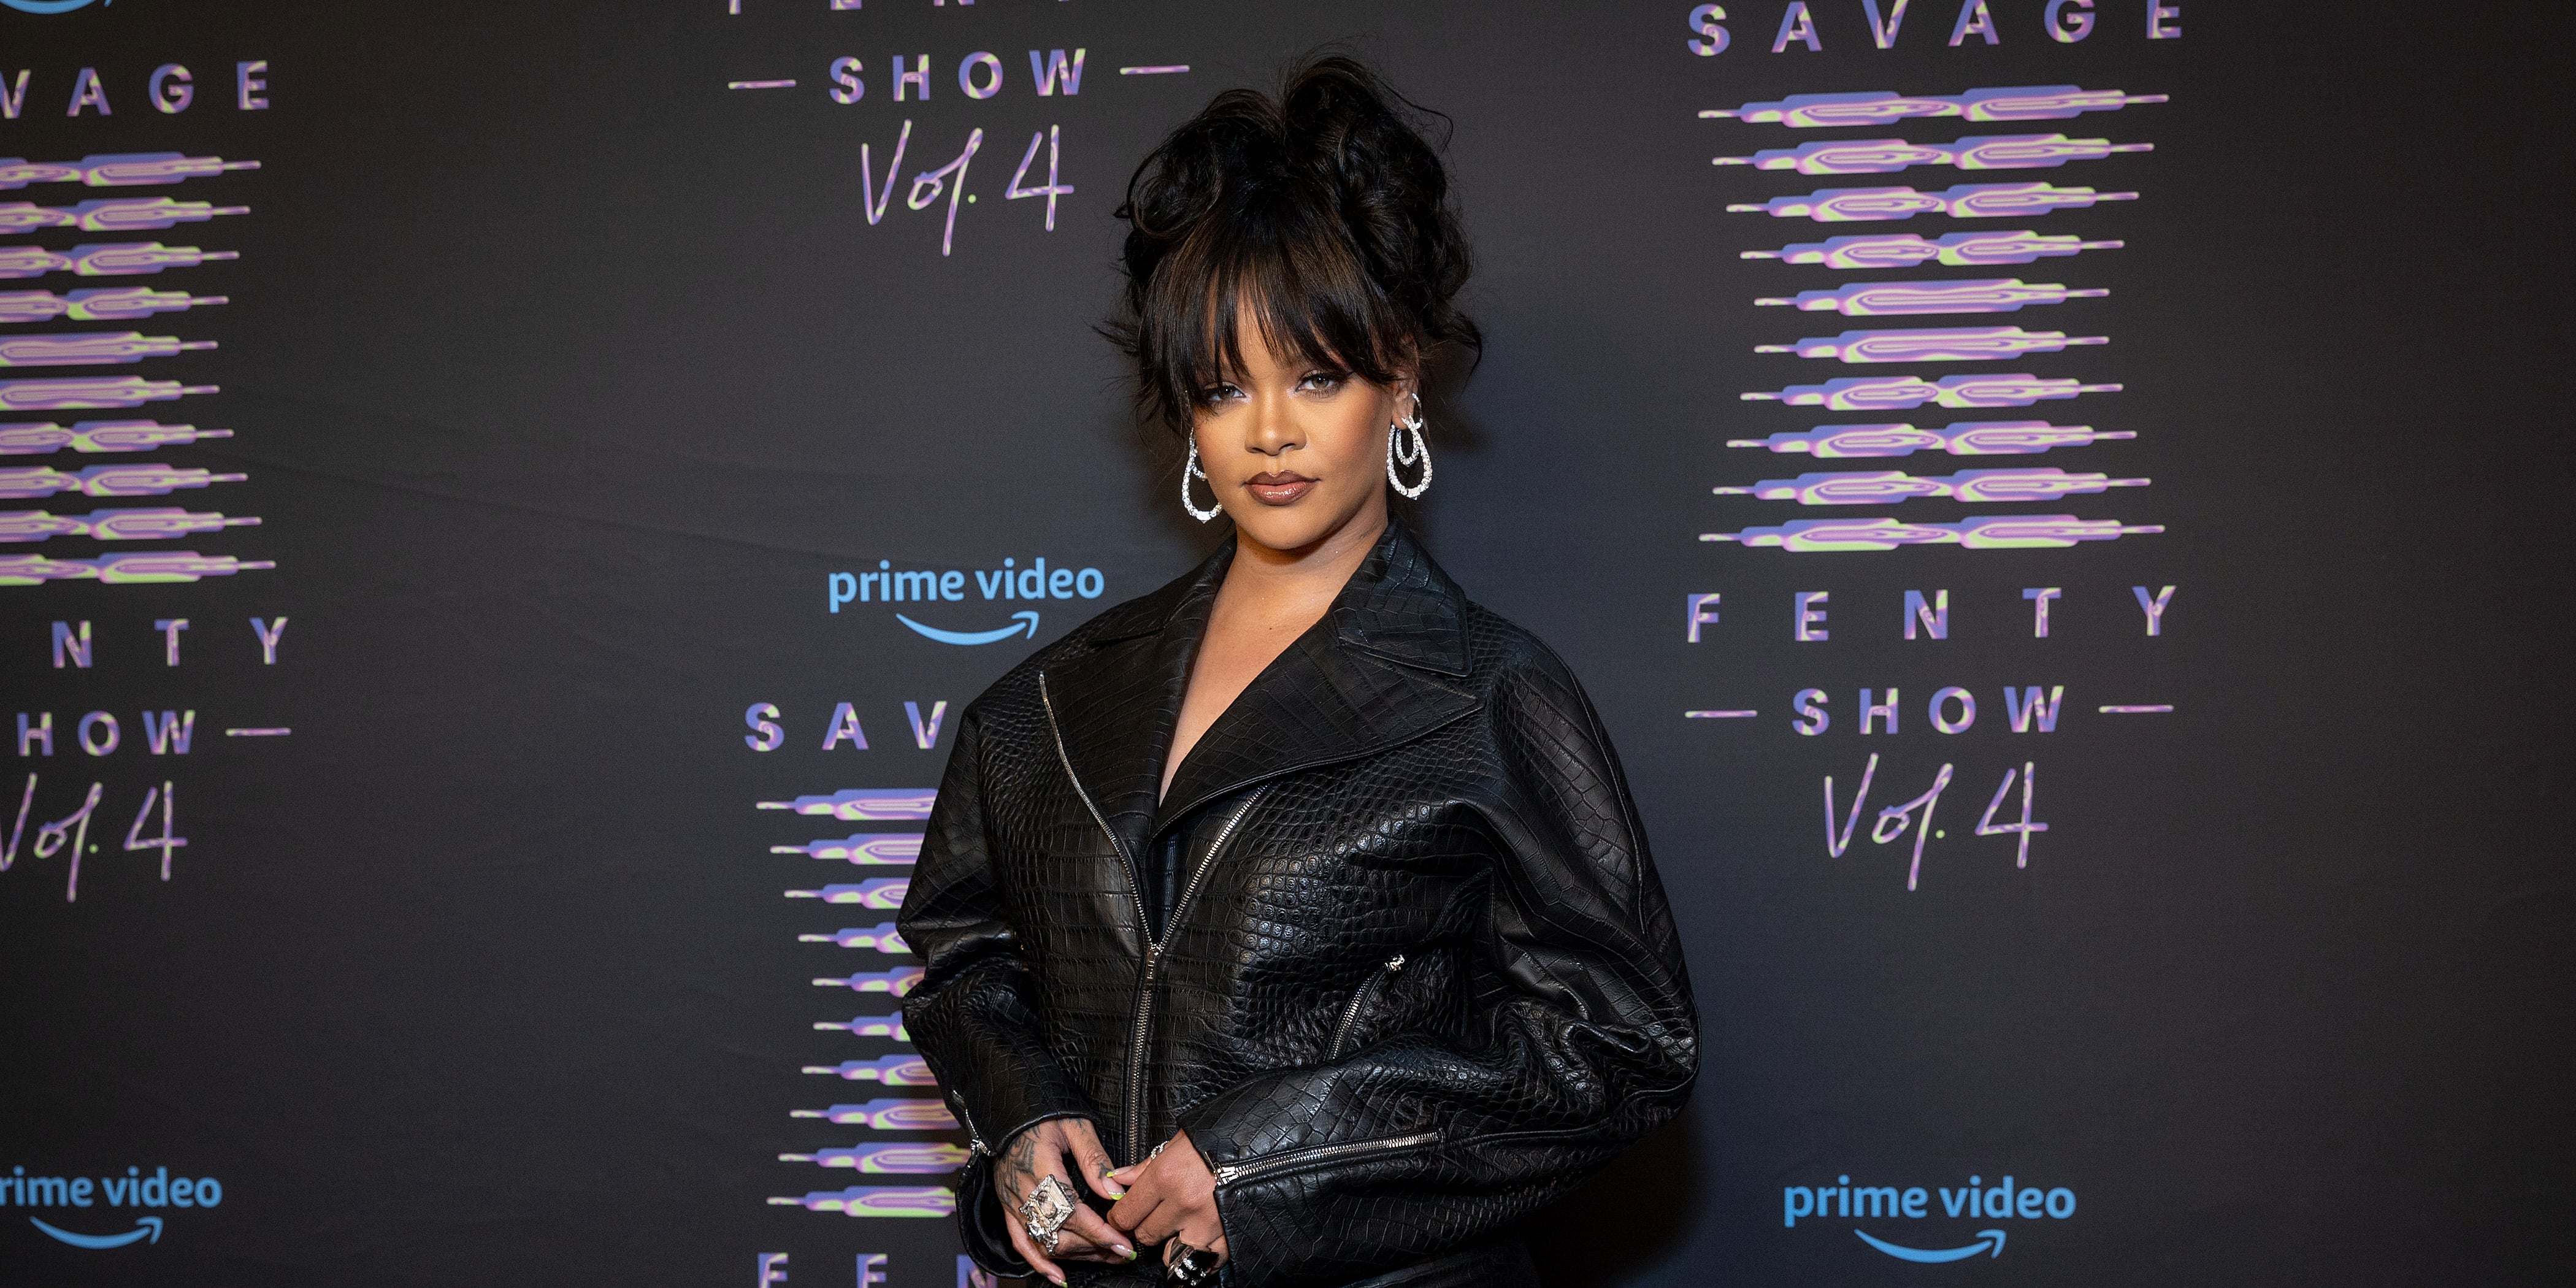 Watch the SAVAGE X FENTY show now on Prime Video